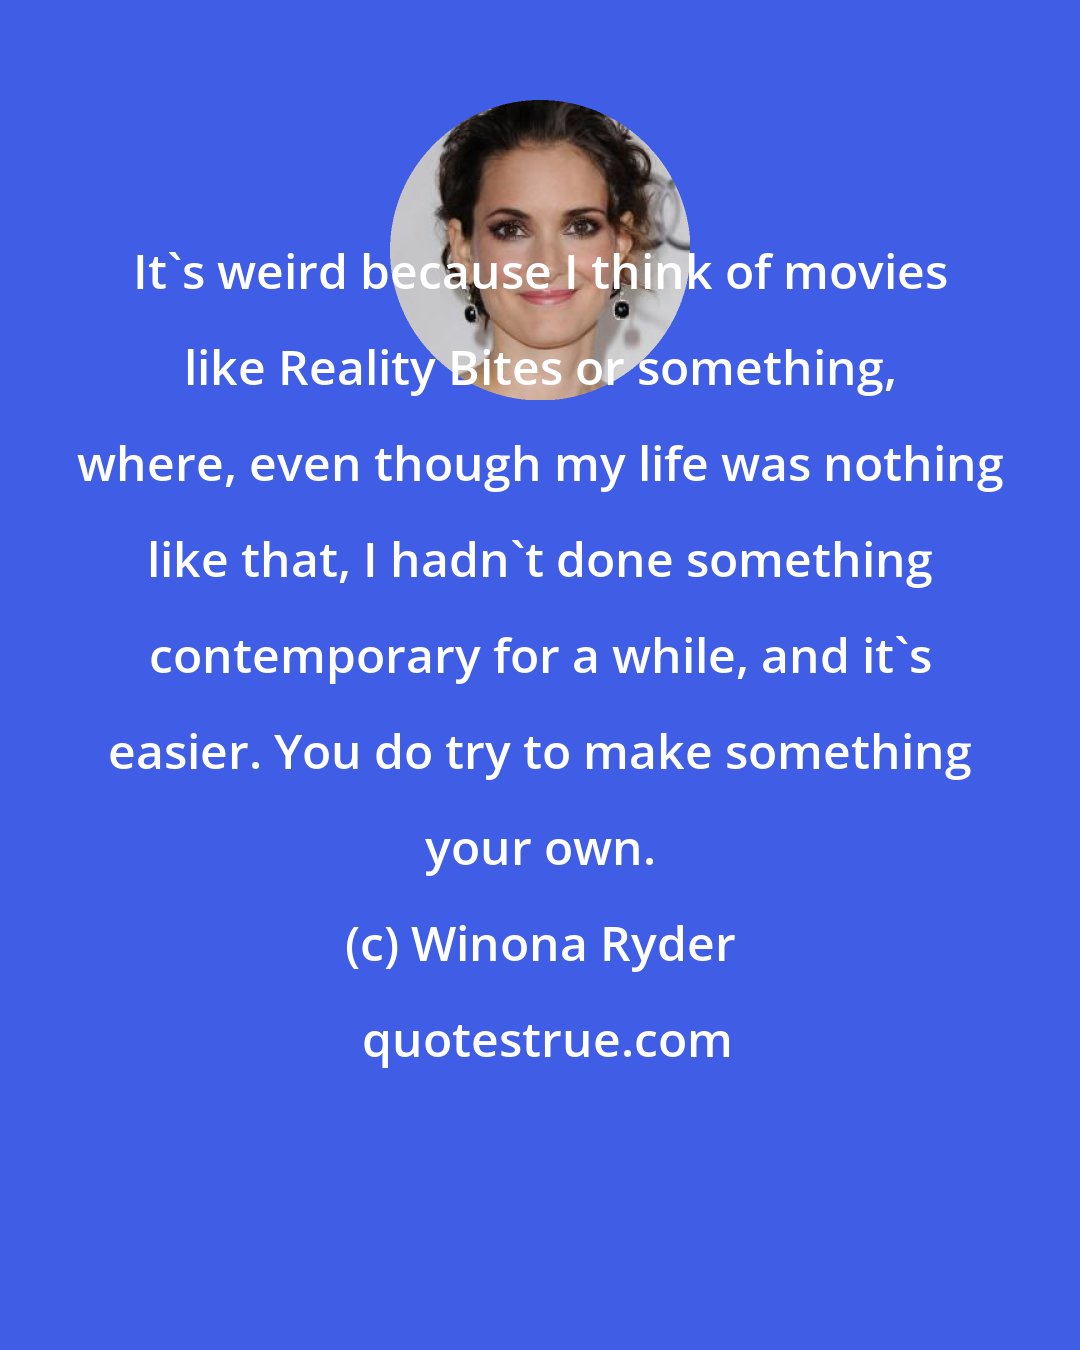 Winona Ryder: It's weird because I think of movies like Reality Bites or something, where, even though my life was nothing like that, I hadn't done something contemporary for a while, and it's easier. You do try to make something your own.